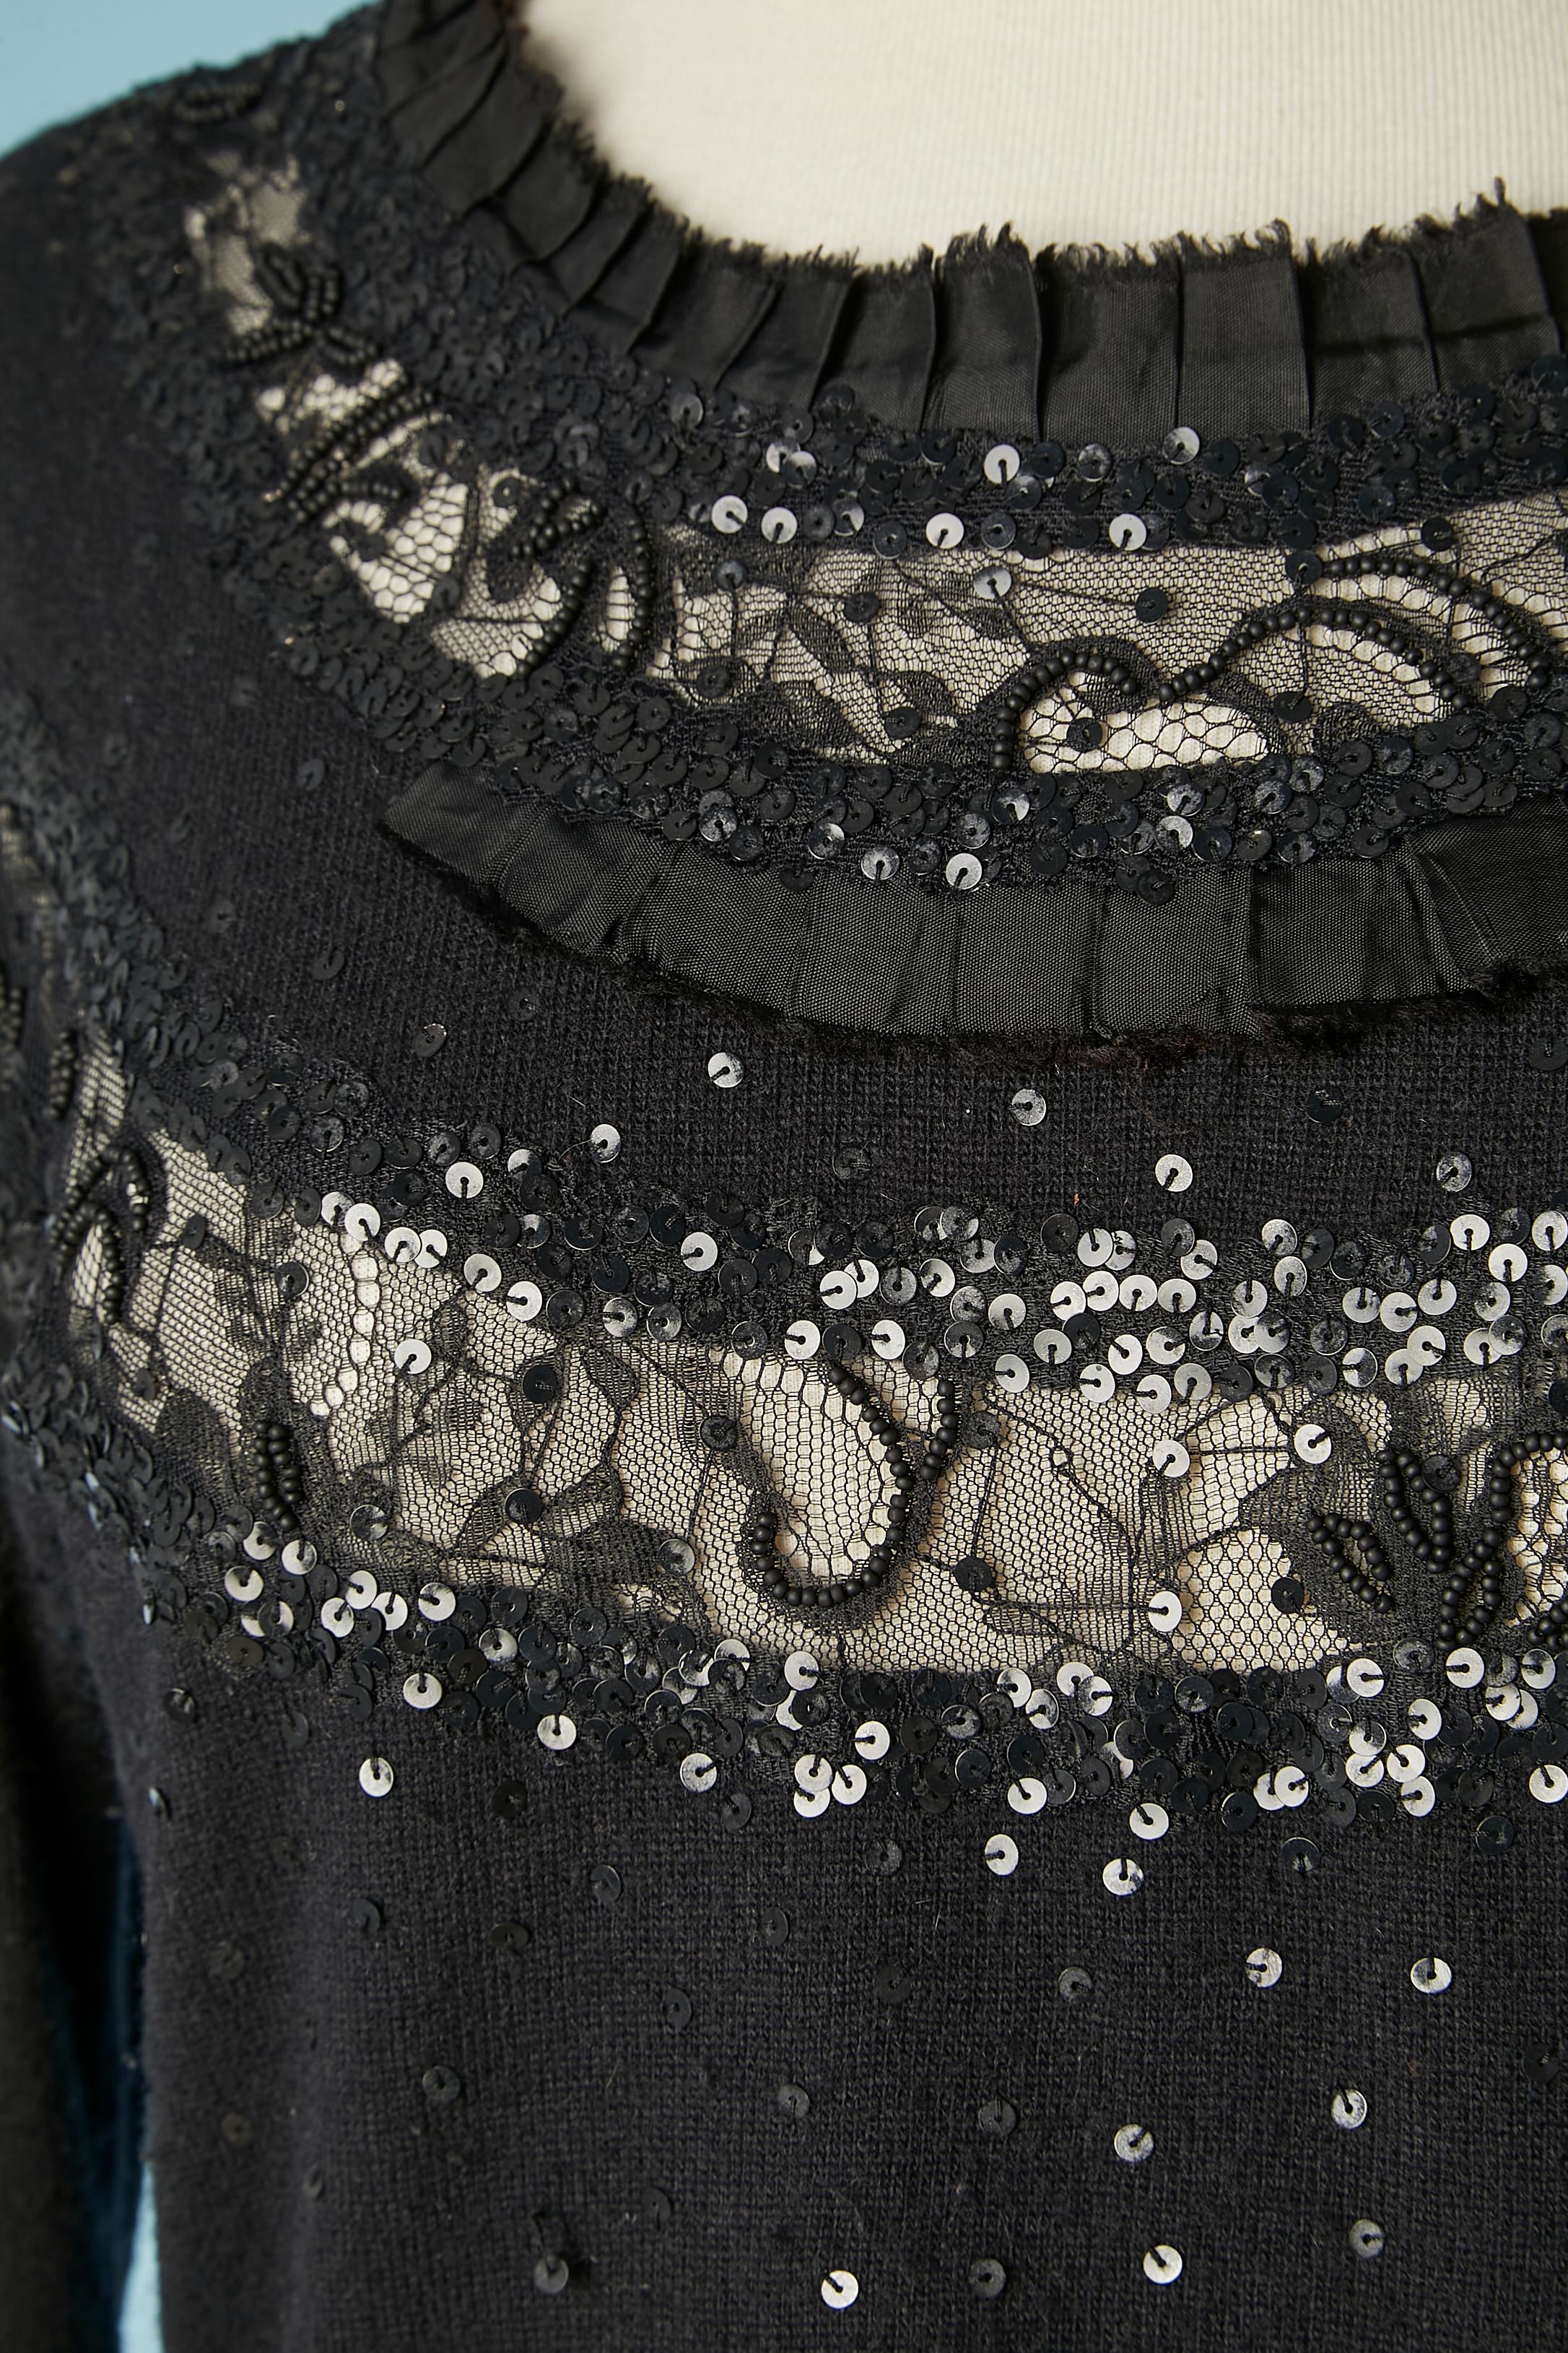 Black evening sweater with lace, sequins and beads embroideries. Fabric composition: 29% wool, 35% rayon, 20% polyamide, 6% cashmere, 8% angora. See-throught through the lace.
SIZE M